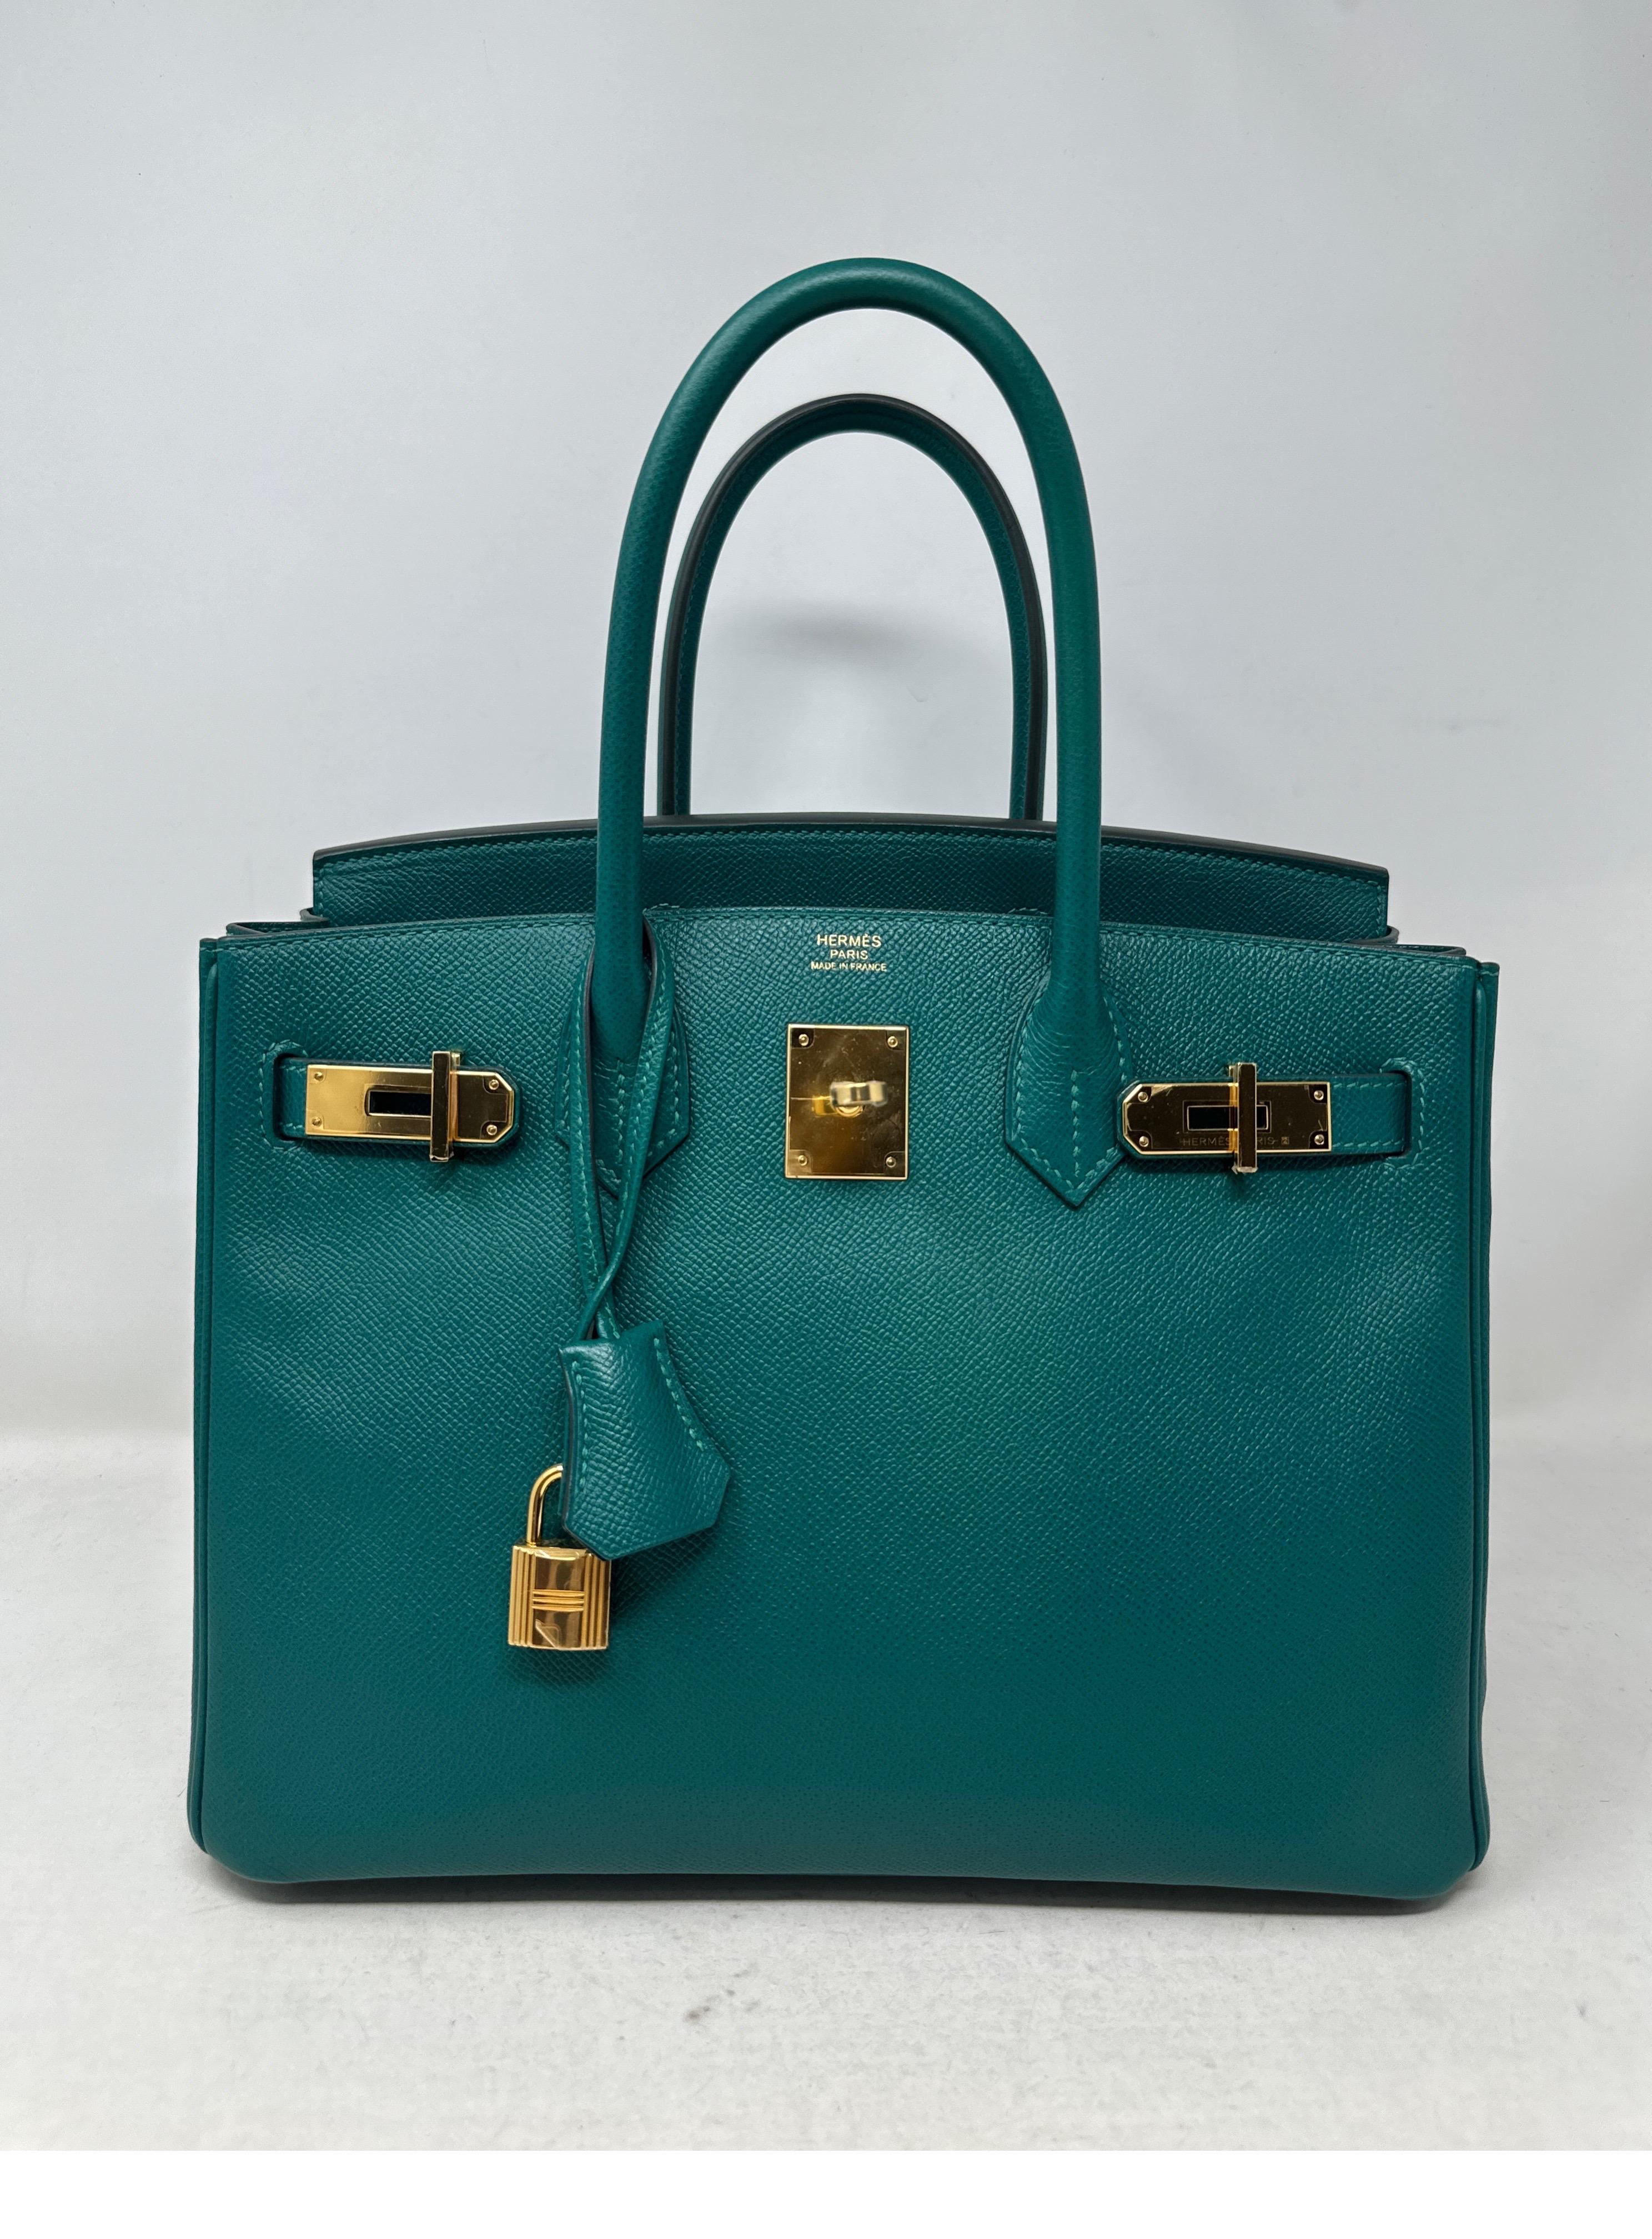 Hermes Malachite Birkin 30 Bag. Darker green color. Gold hardware. Epsom leather. Excellent condition. Nice nuetral green color. Interior clean. Includes clochette, lock, keys, and dust bag. Guaranteed authentic. 